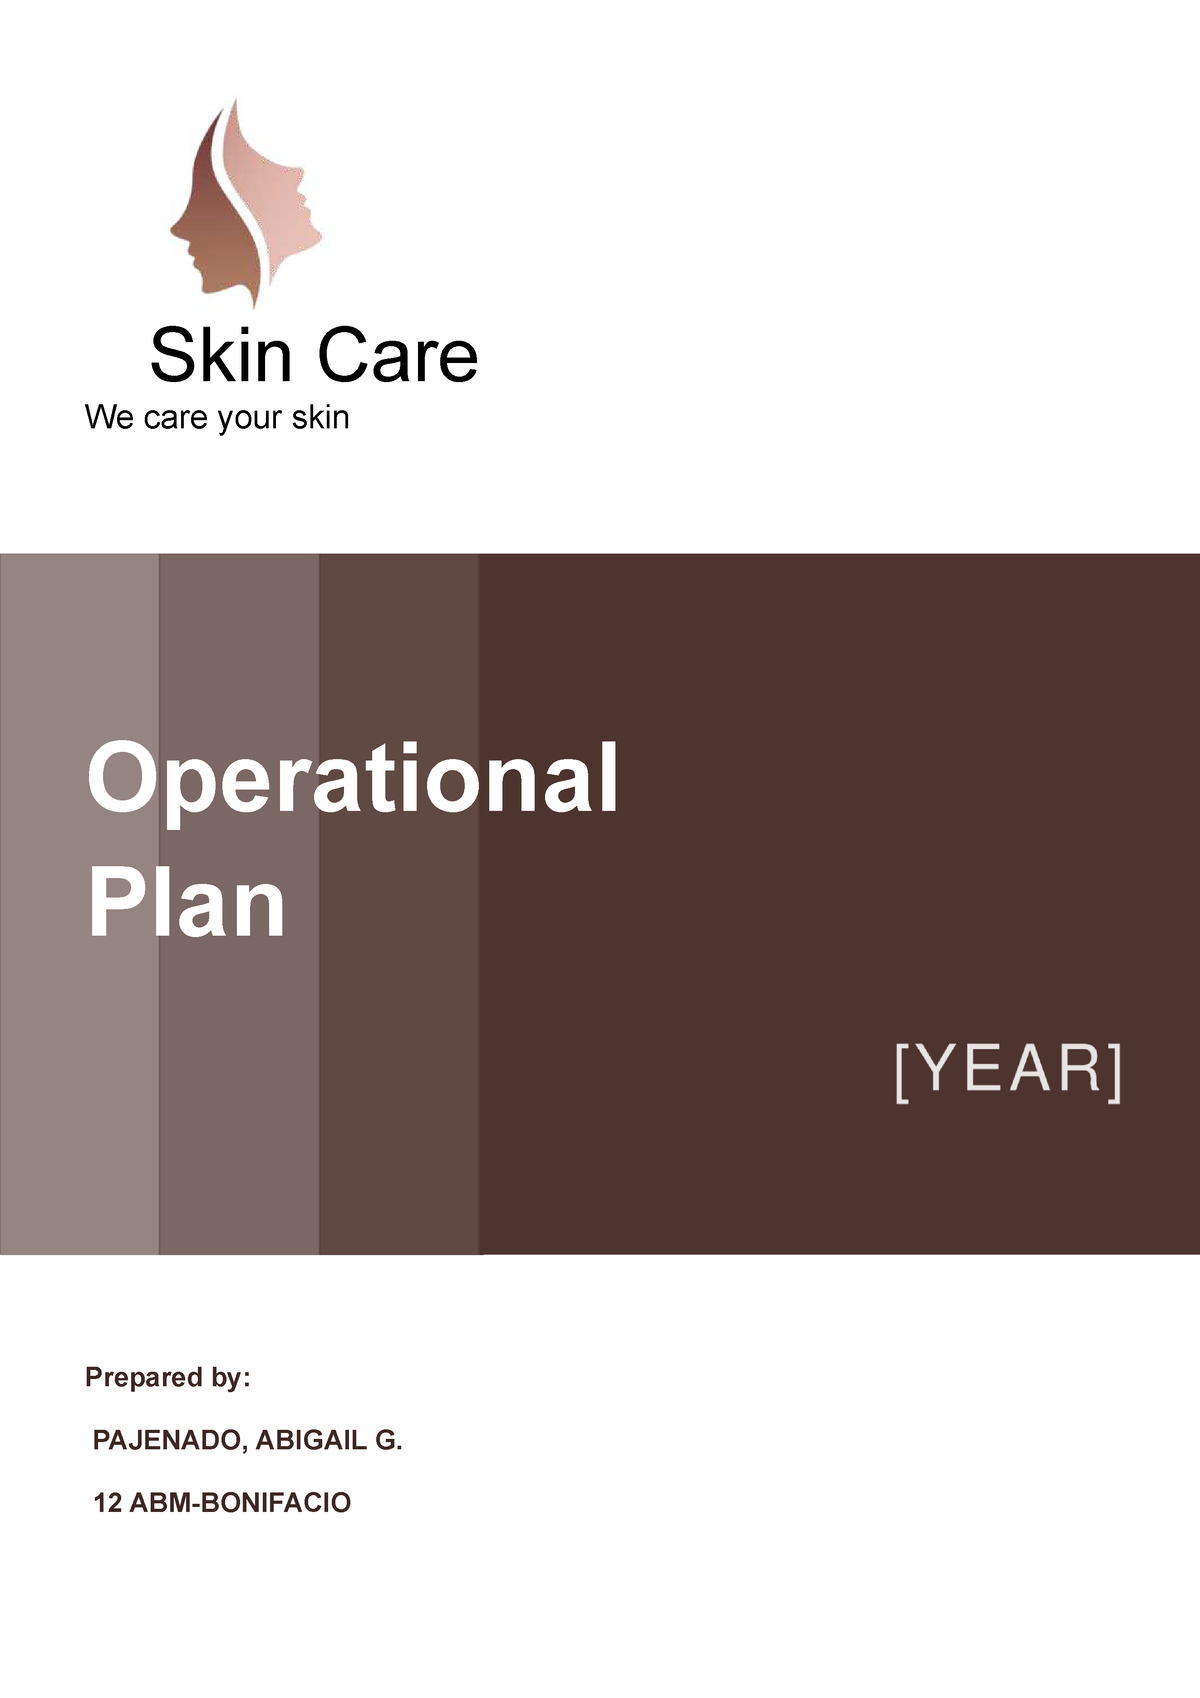 how to make a business plan for skin care